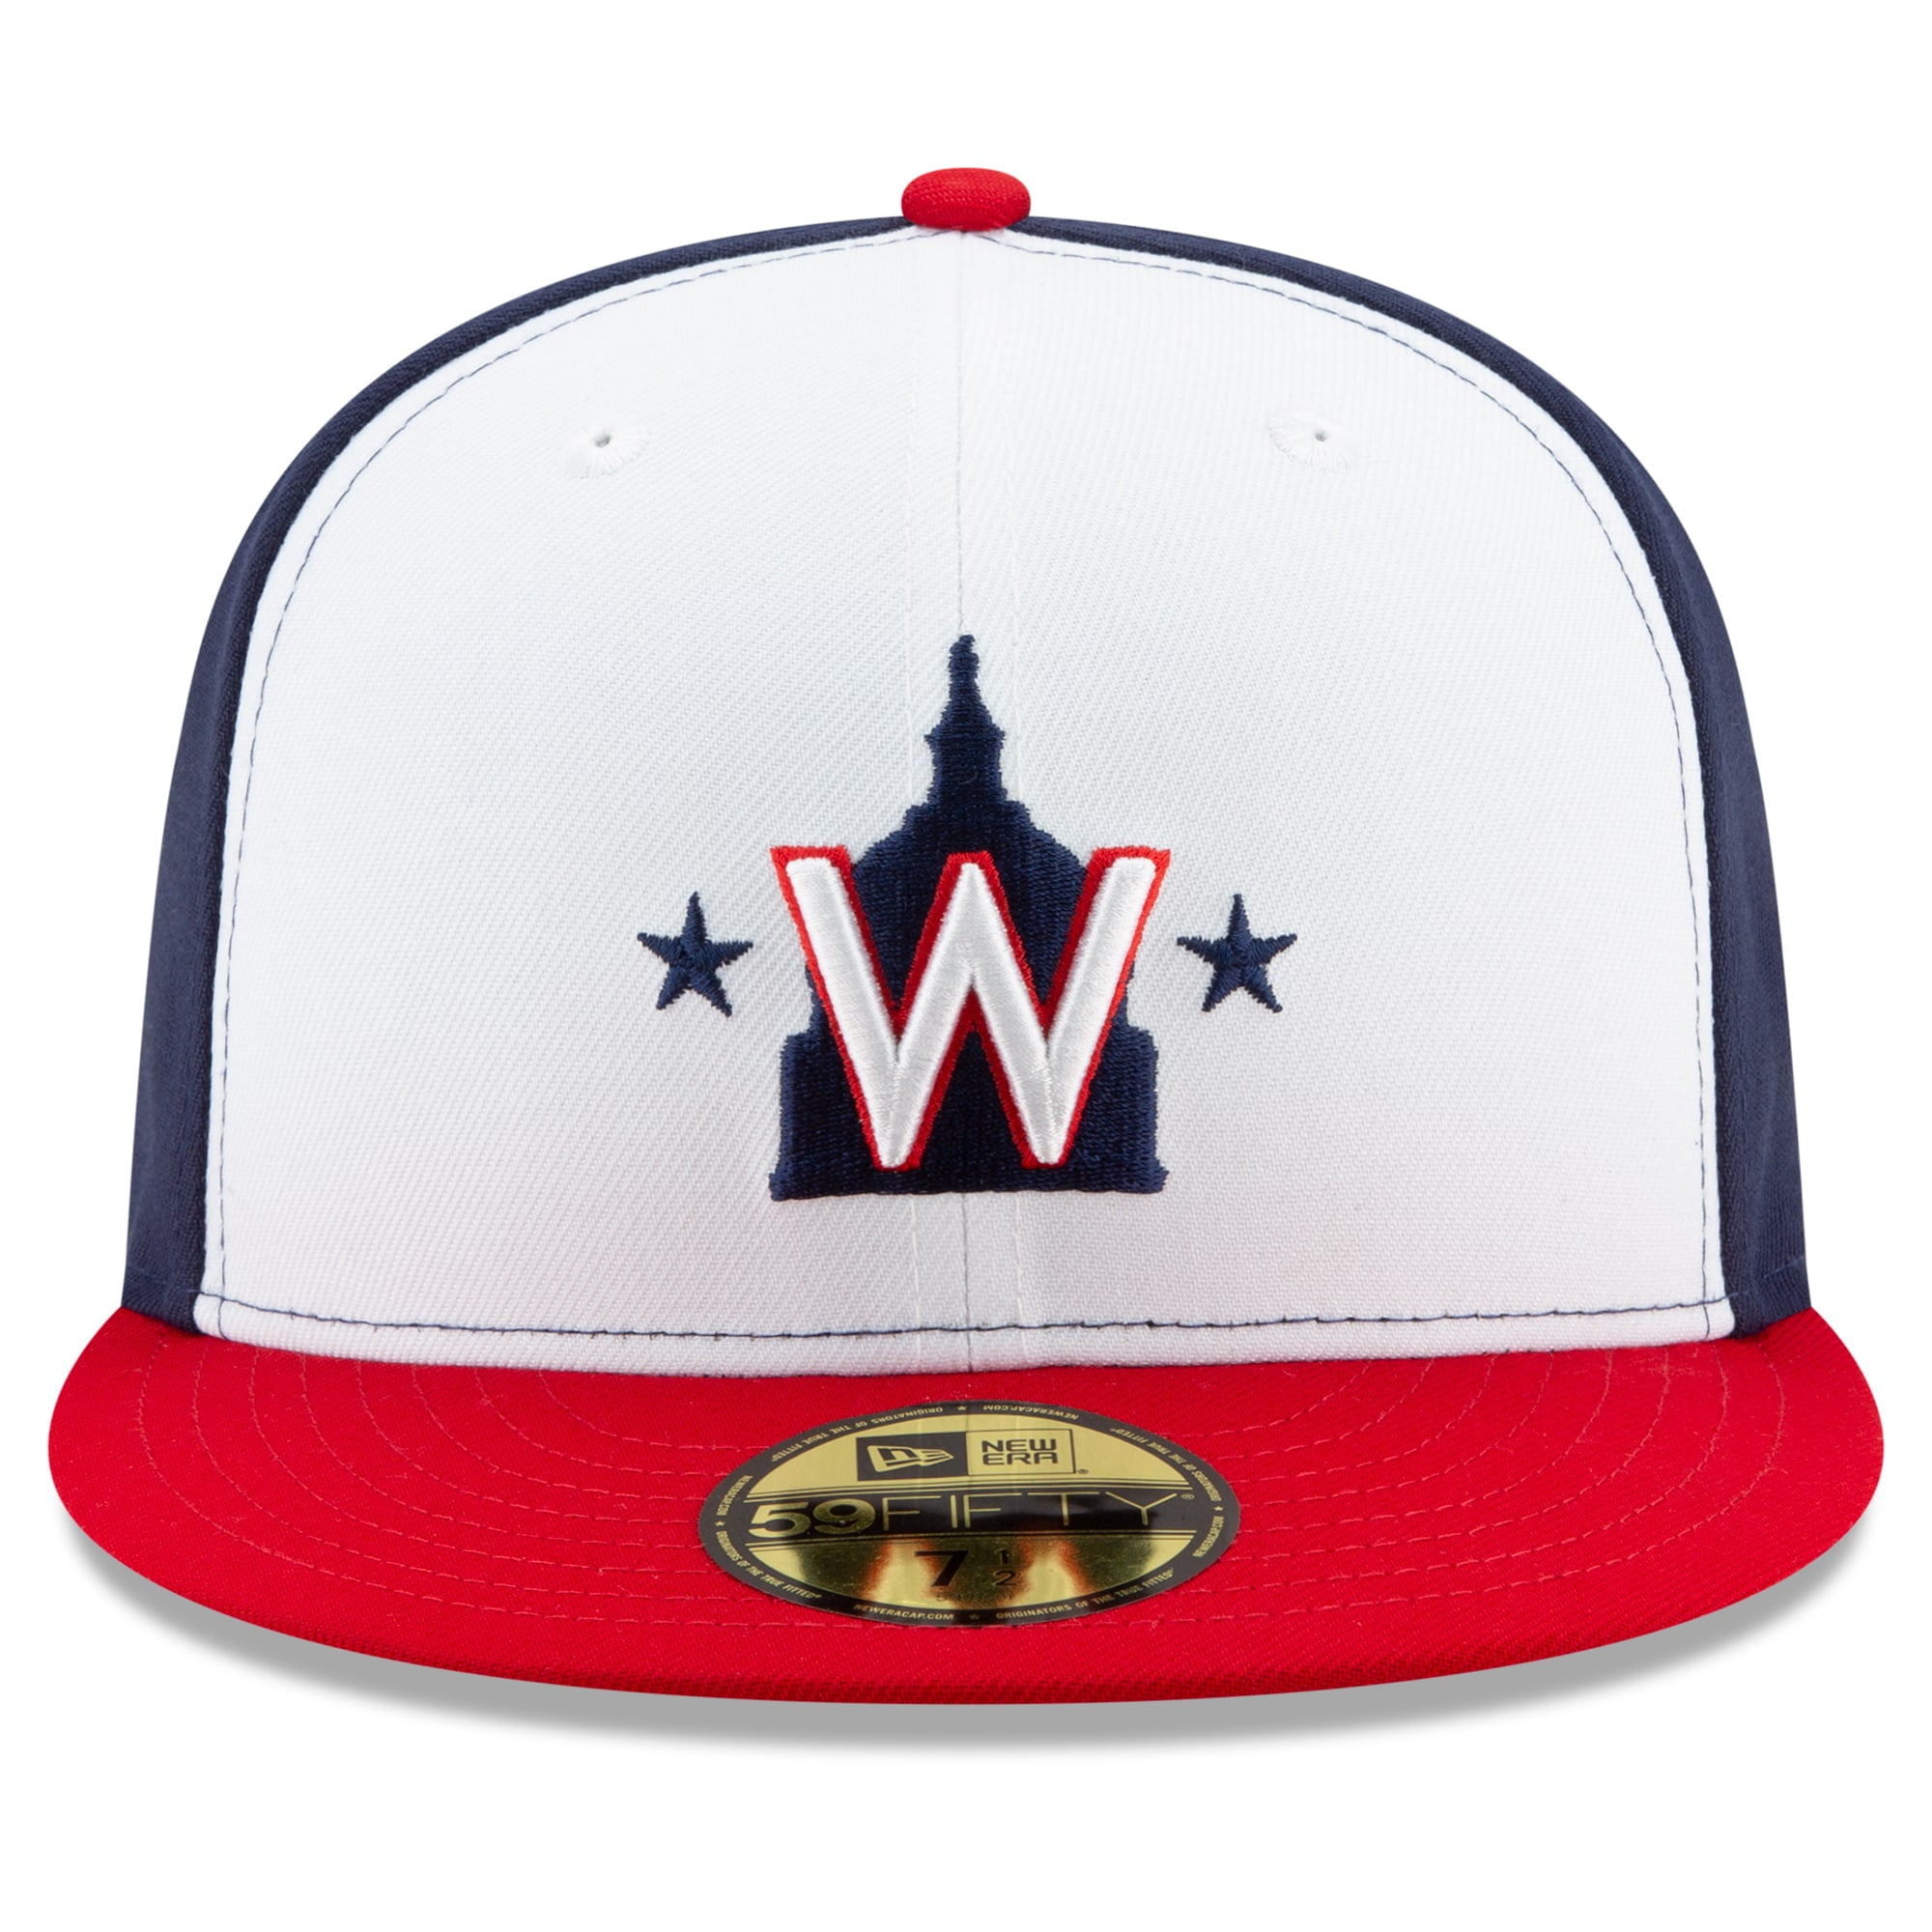 Men's New Era White Washington Nationals Alternate 2 2020 Authentic  Collection On-Field 59FIFTY Fitted Hat 